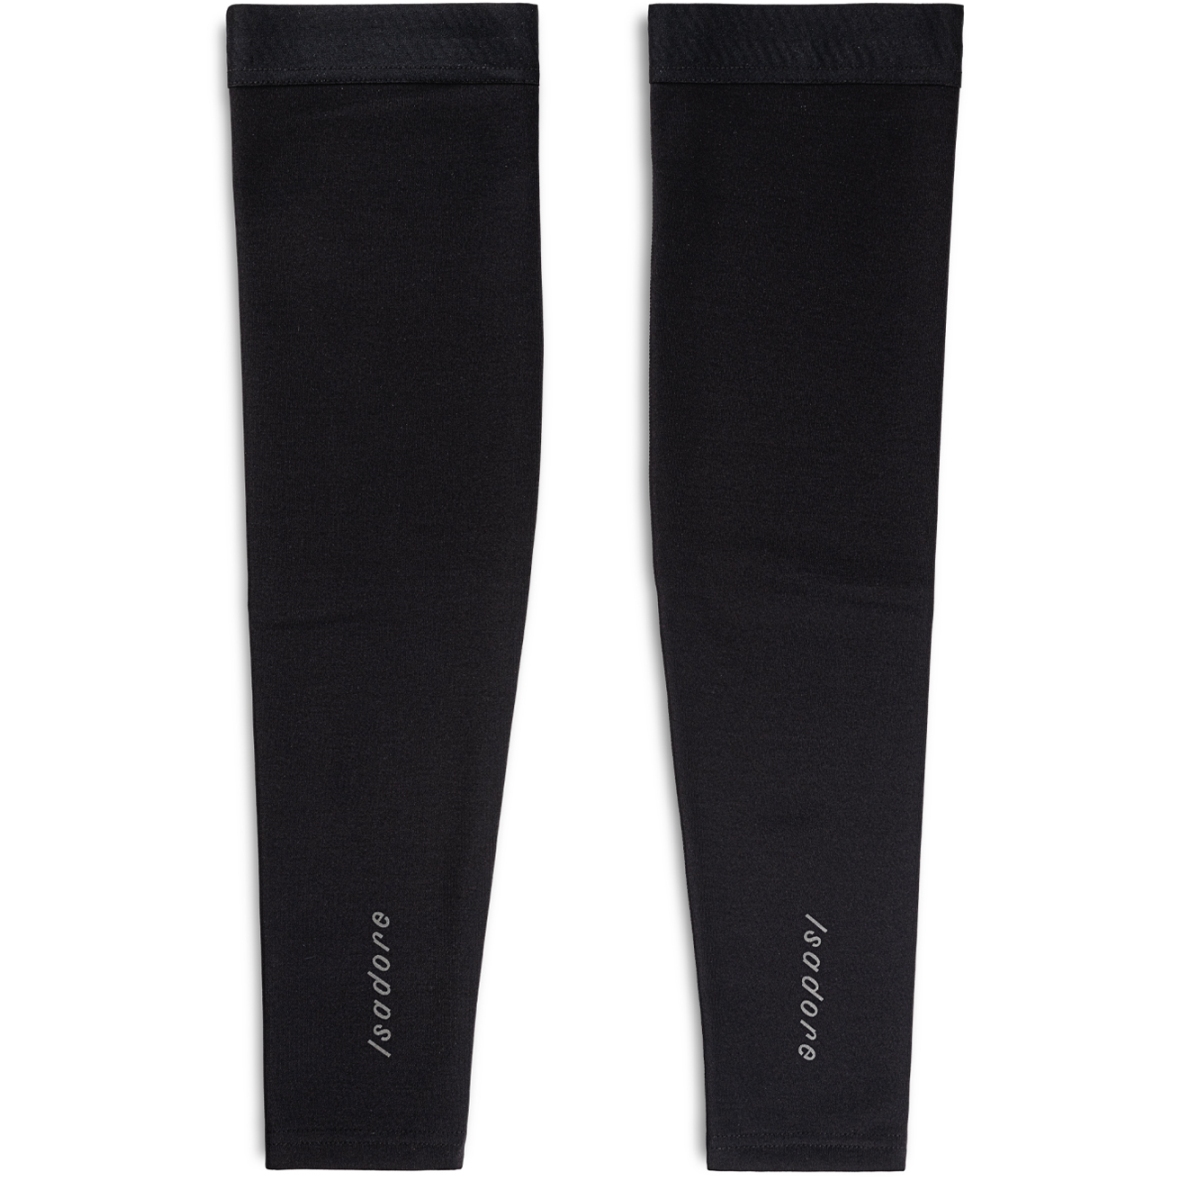 Picture of Isadore Signature Arm Warmers - Black